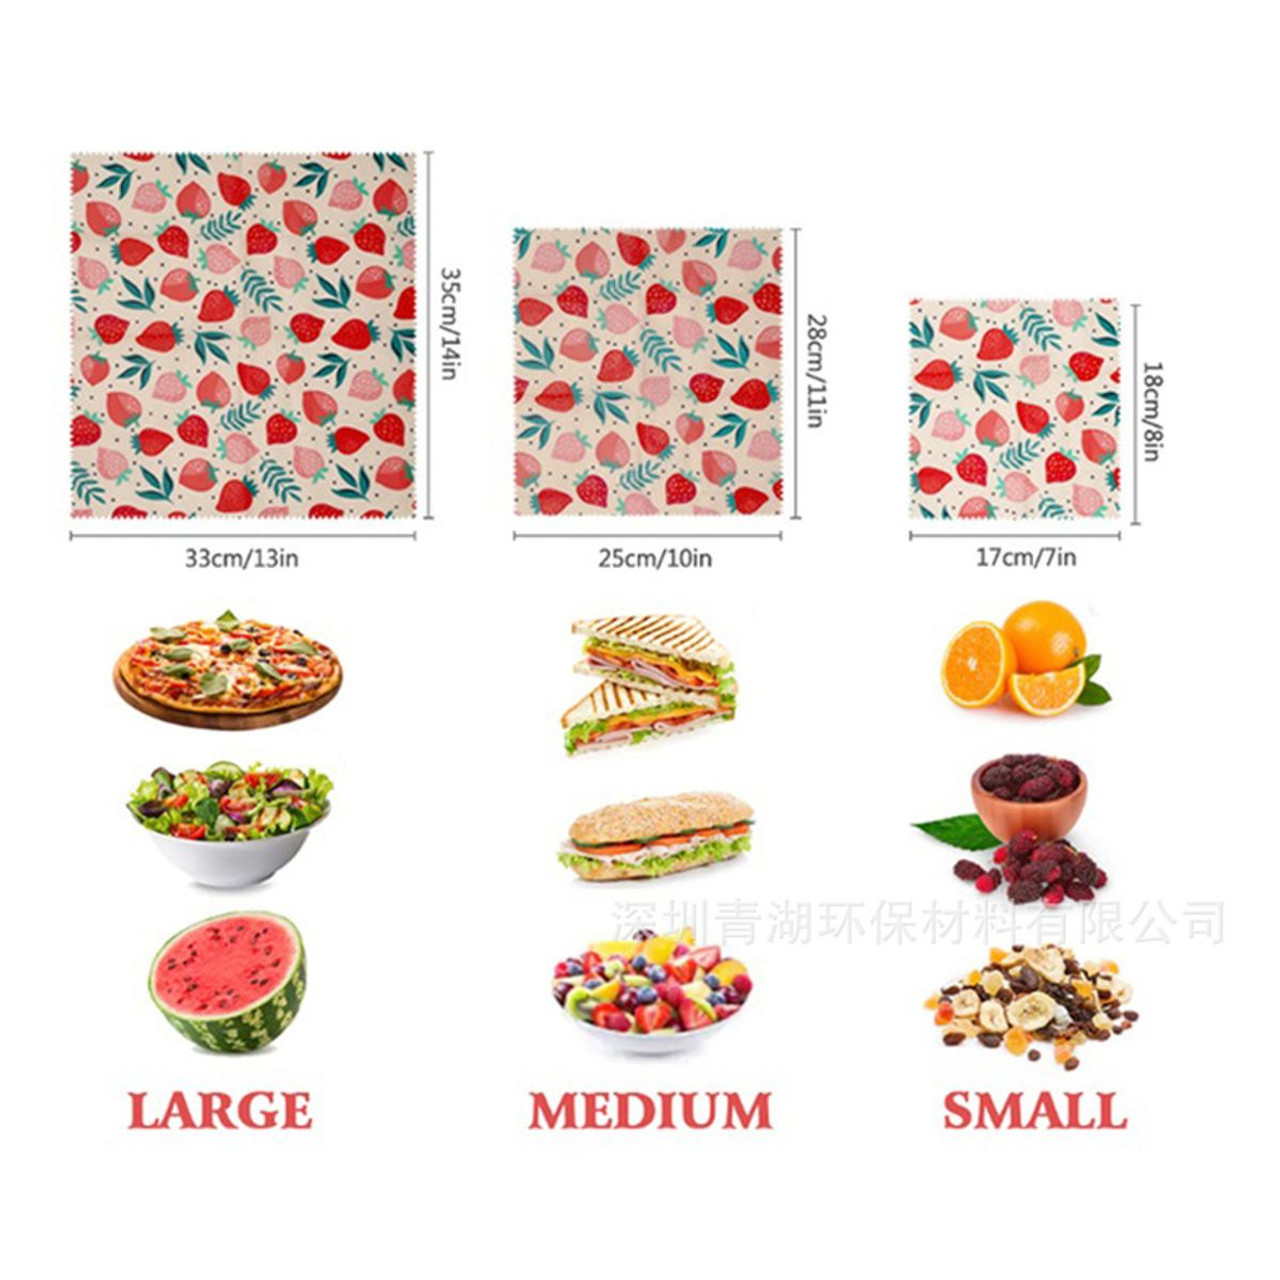 Honeycomb Pattern - Reusable Beeswax Food Wraps, Eco Friendly Beeswax Food Wrap, Sustainable Food Storage Containers,3 Pack (S, M, L) product image